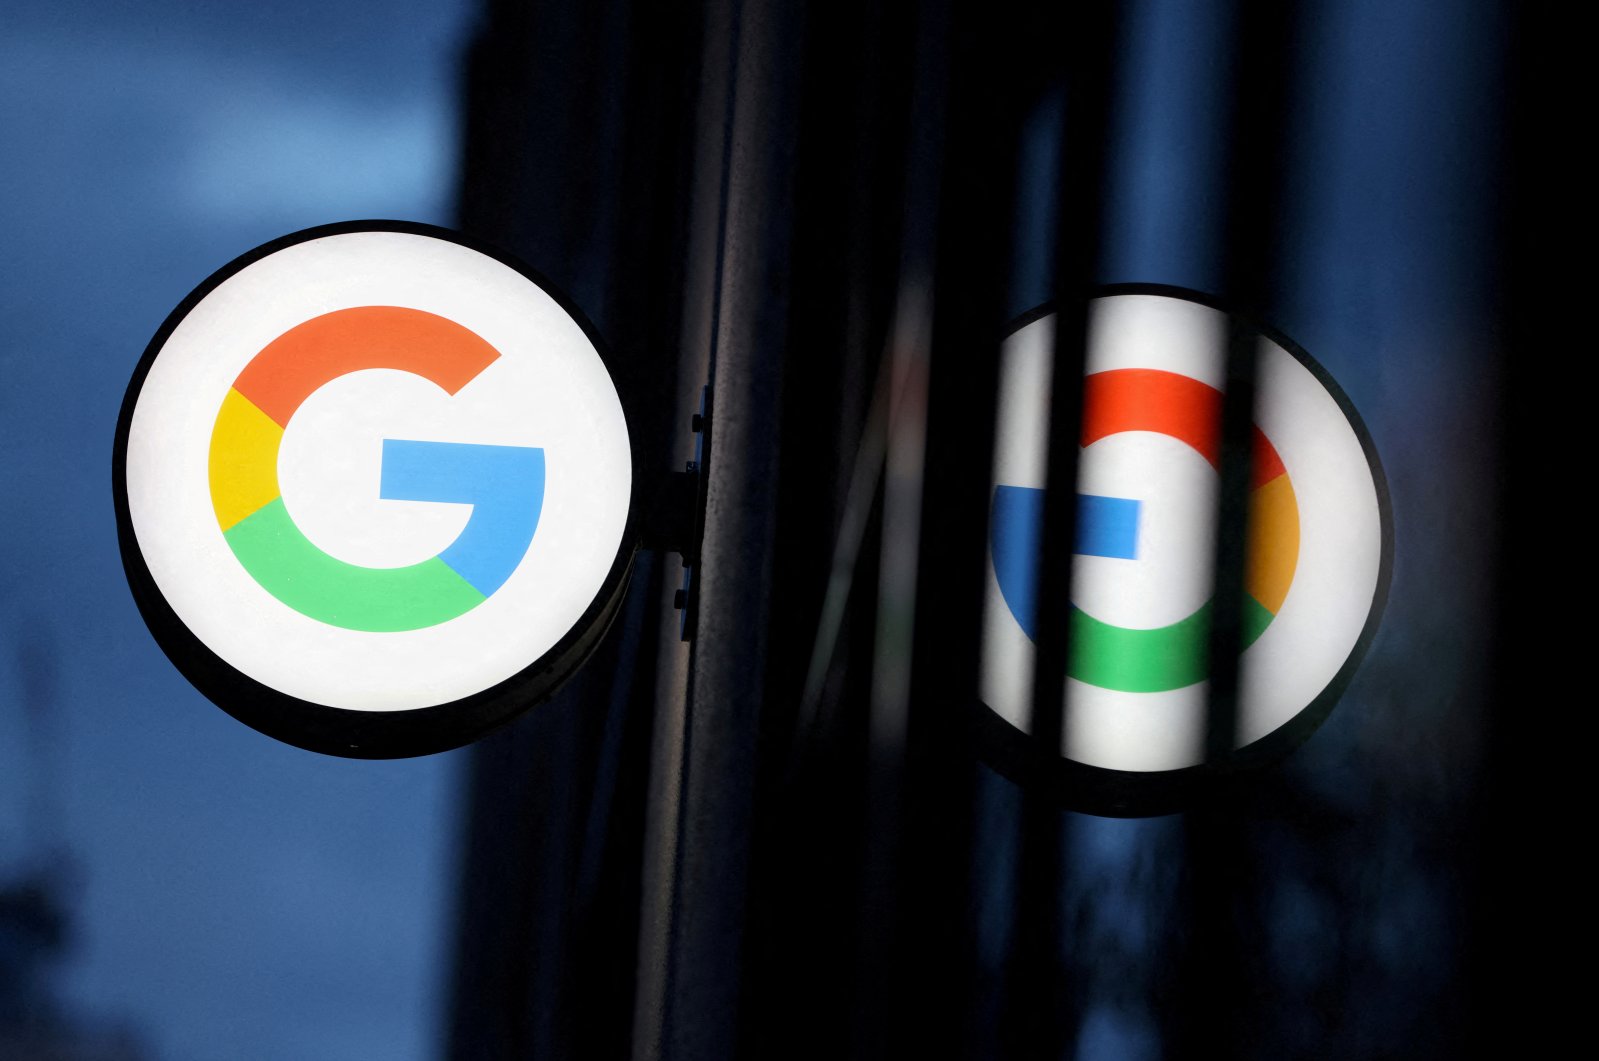 The logo for Google LLC is seen at the Google Store Chelsea in Manhattan, New York City, U.S., Nov. 17, 2021. (Reuters Photo)